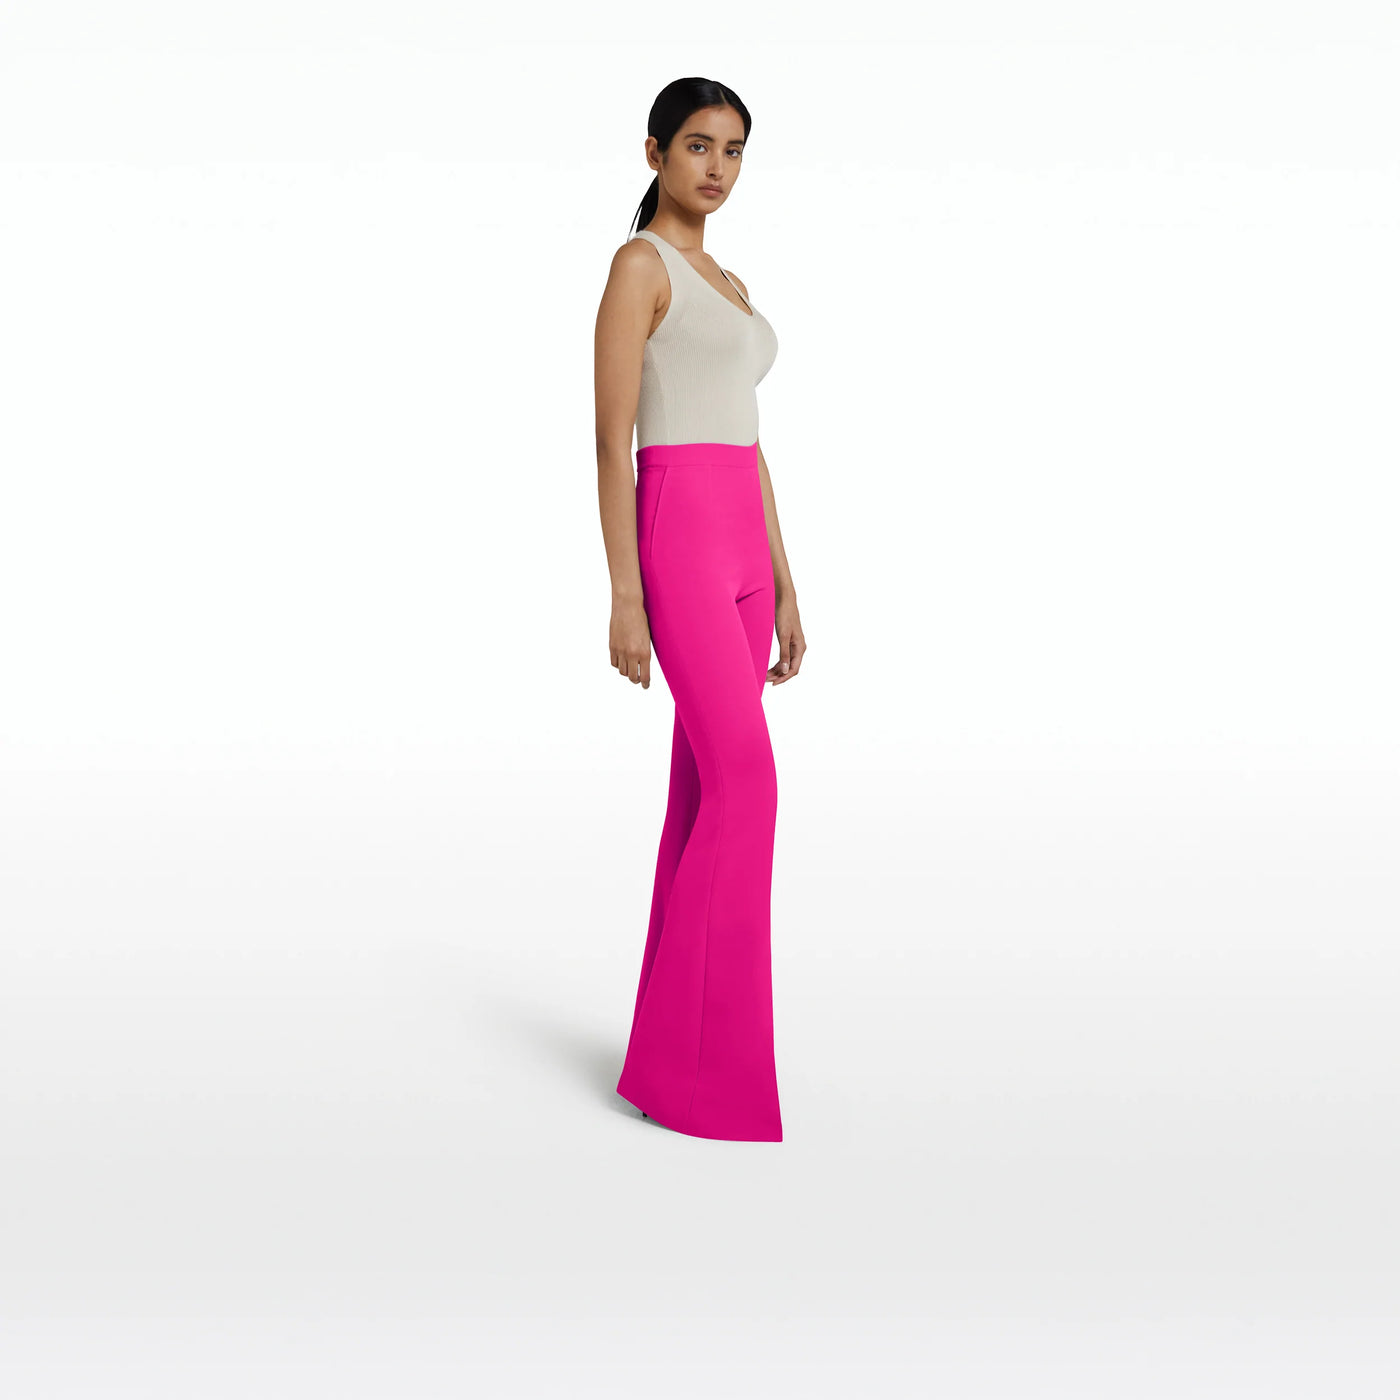 Halluana Side Zip Trousers - More Colors Available